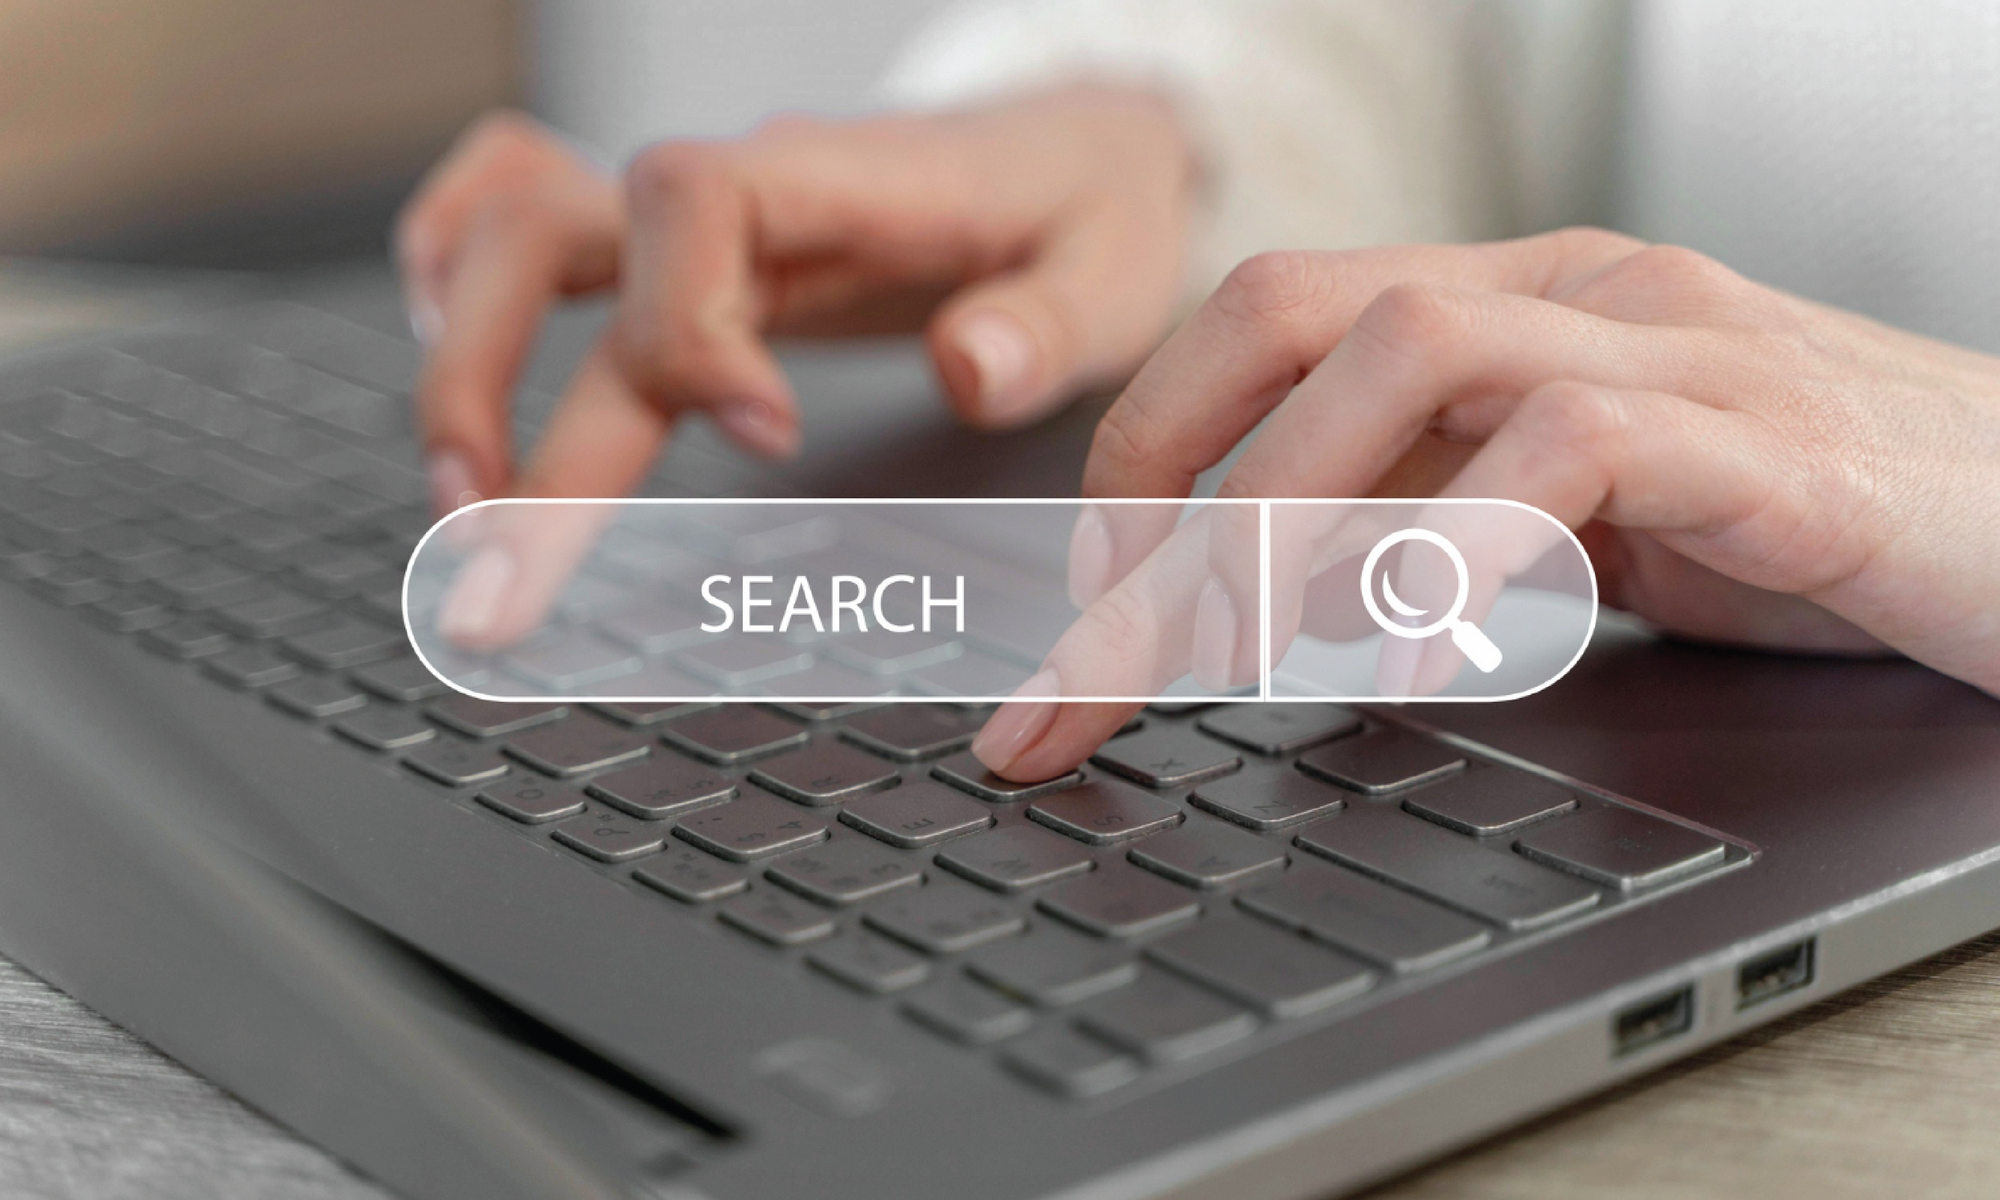 Have online search results become your financial advisor?